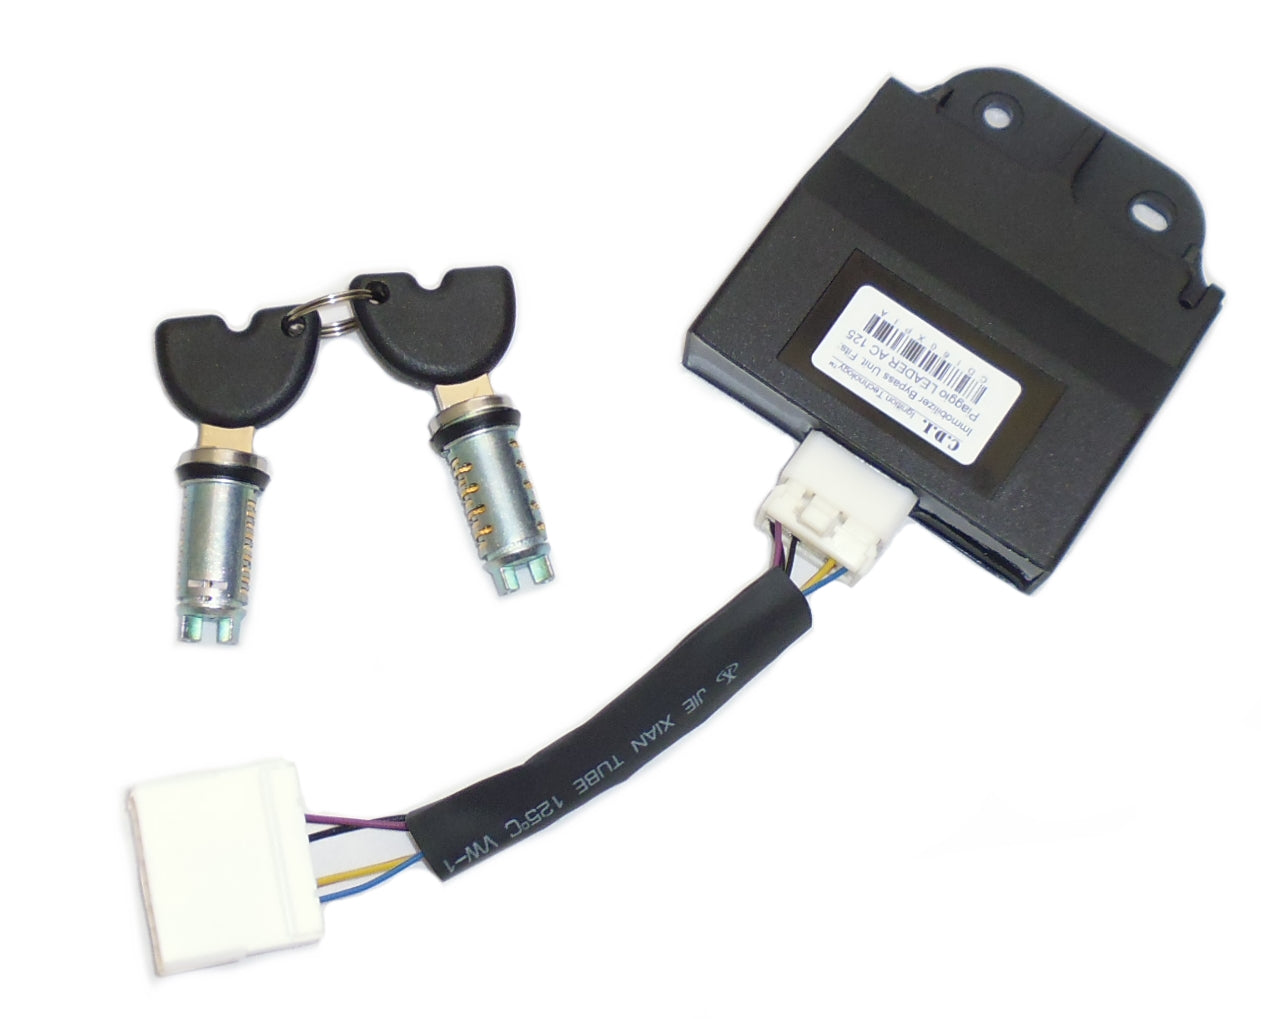 Immobilizer Bypass and Removal CDI unit for the Vespa LX, Piaggio and Liberty, AC19i, AC20i, AC27i 14 pin